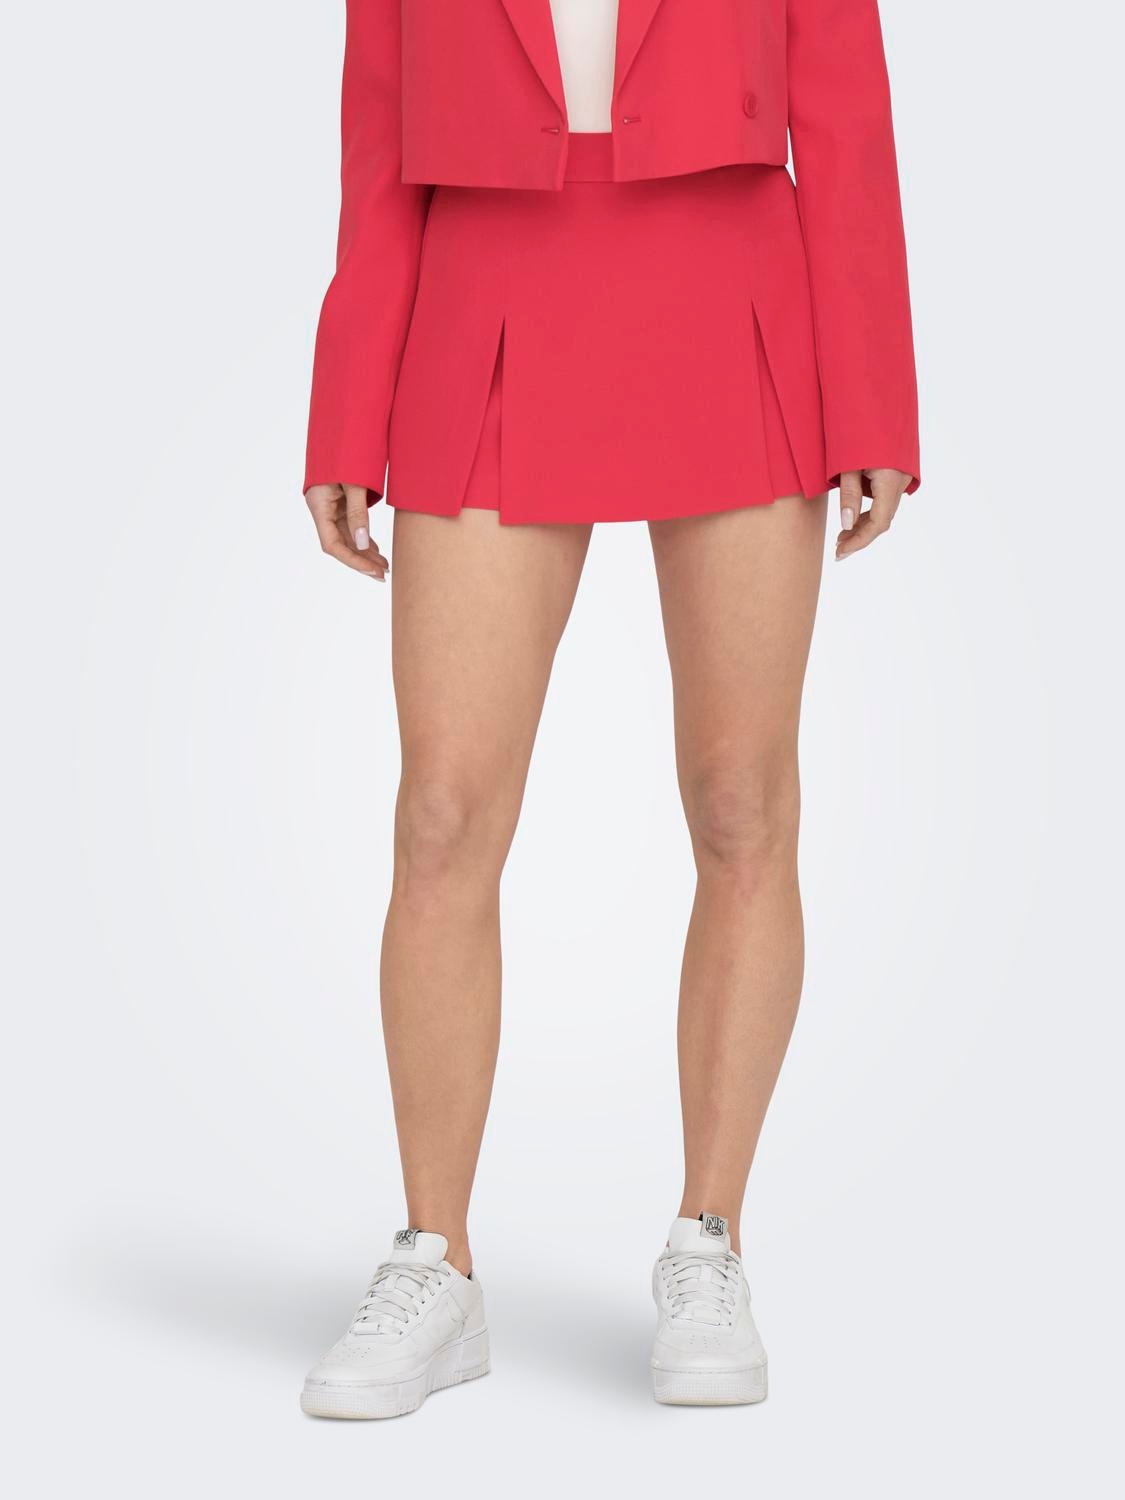 ONLY Mini skort with slits -Teaberry - 15295576